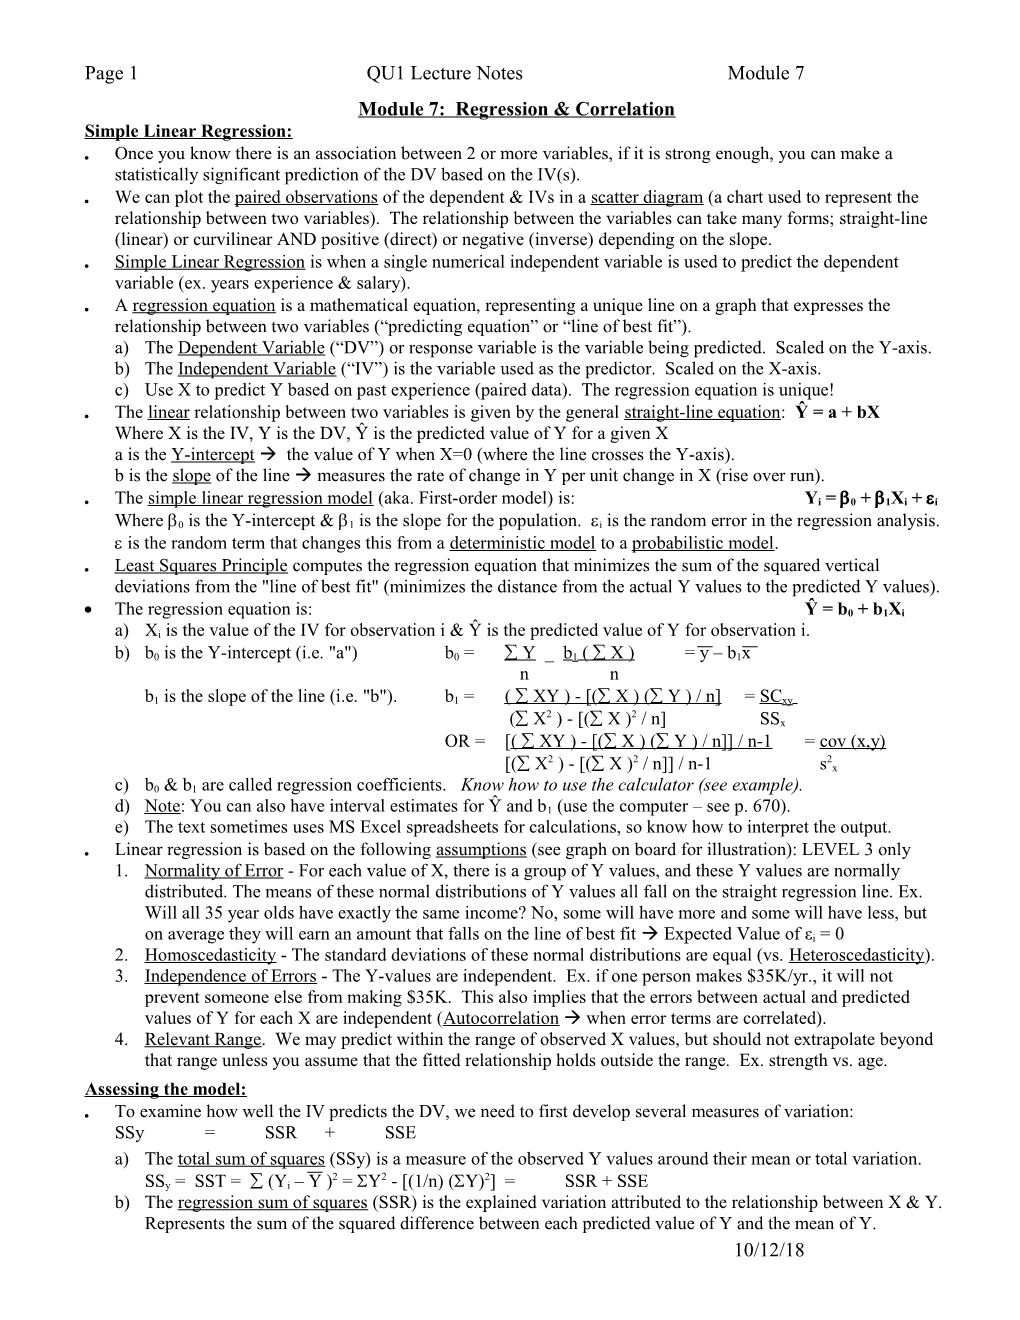 Chapter 9 Lecture Notes: Two-Sample Tests